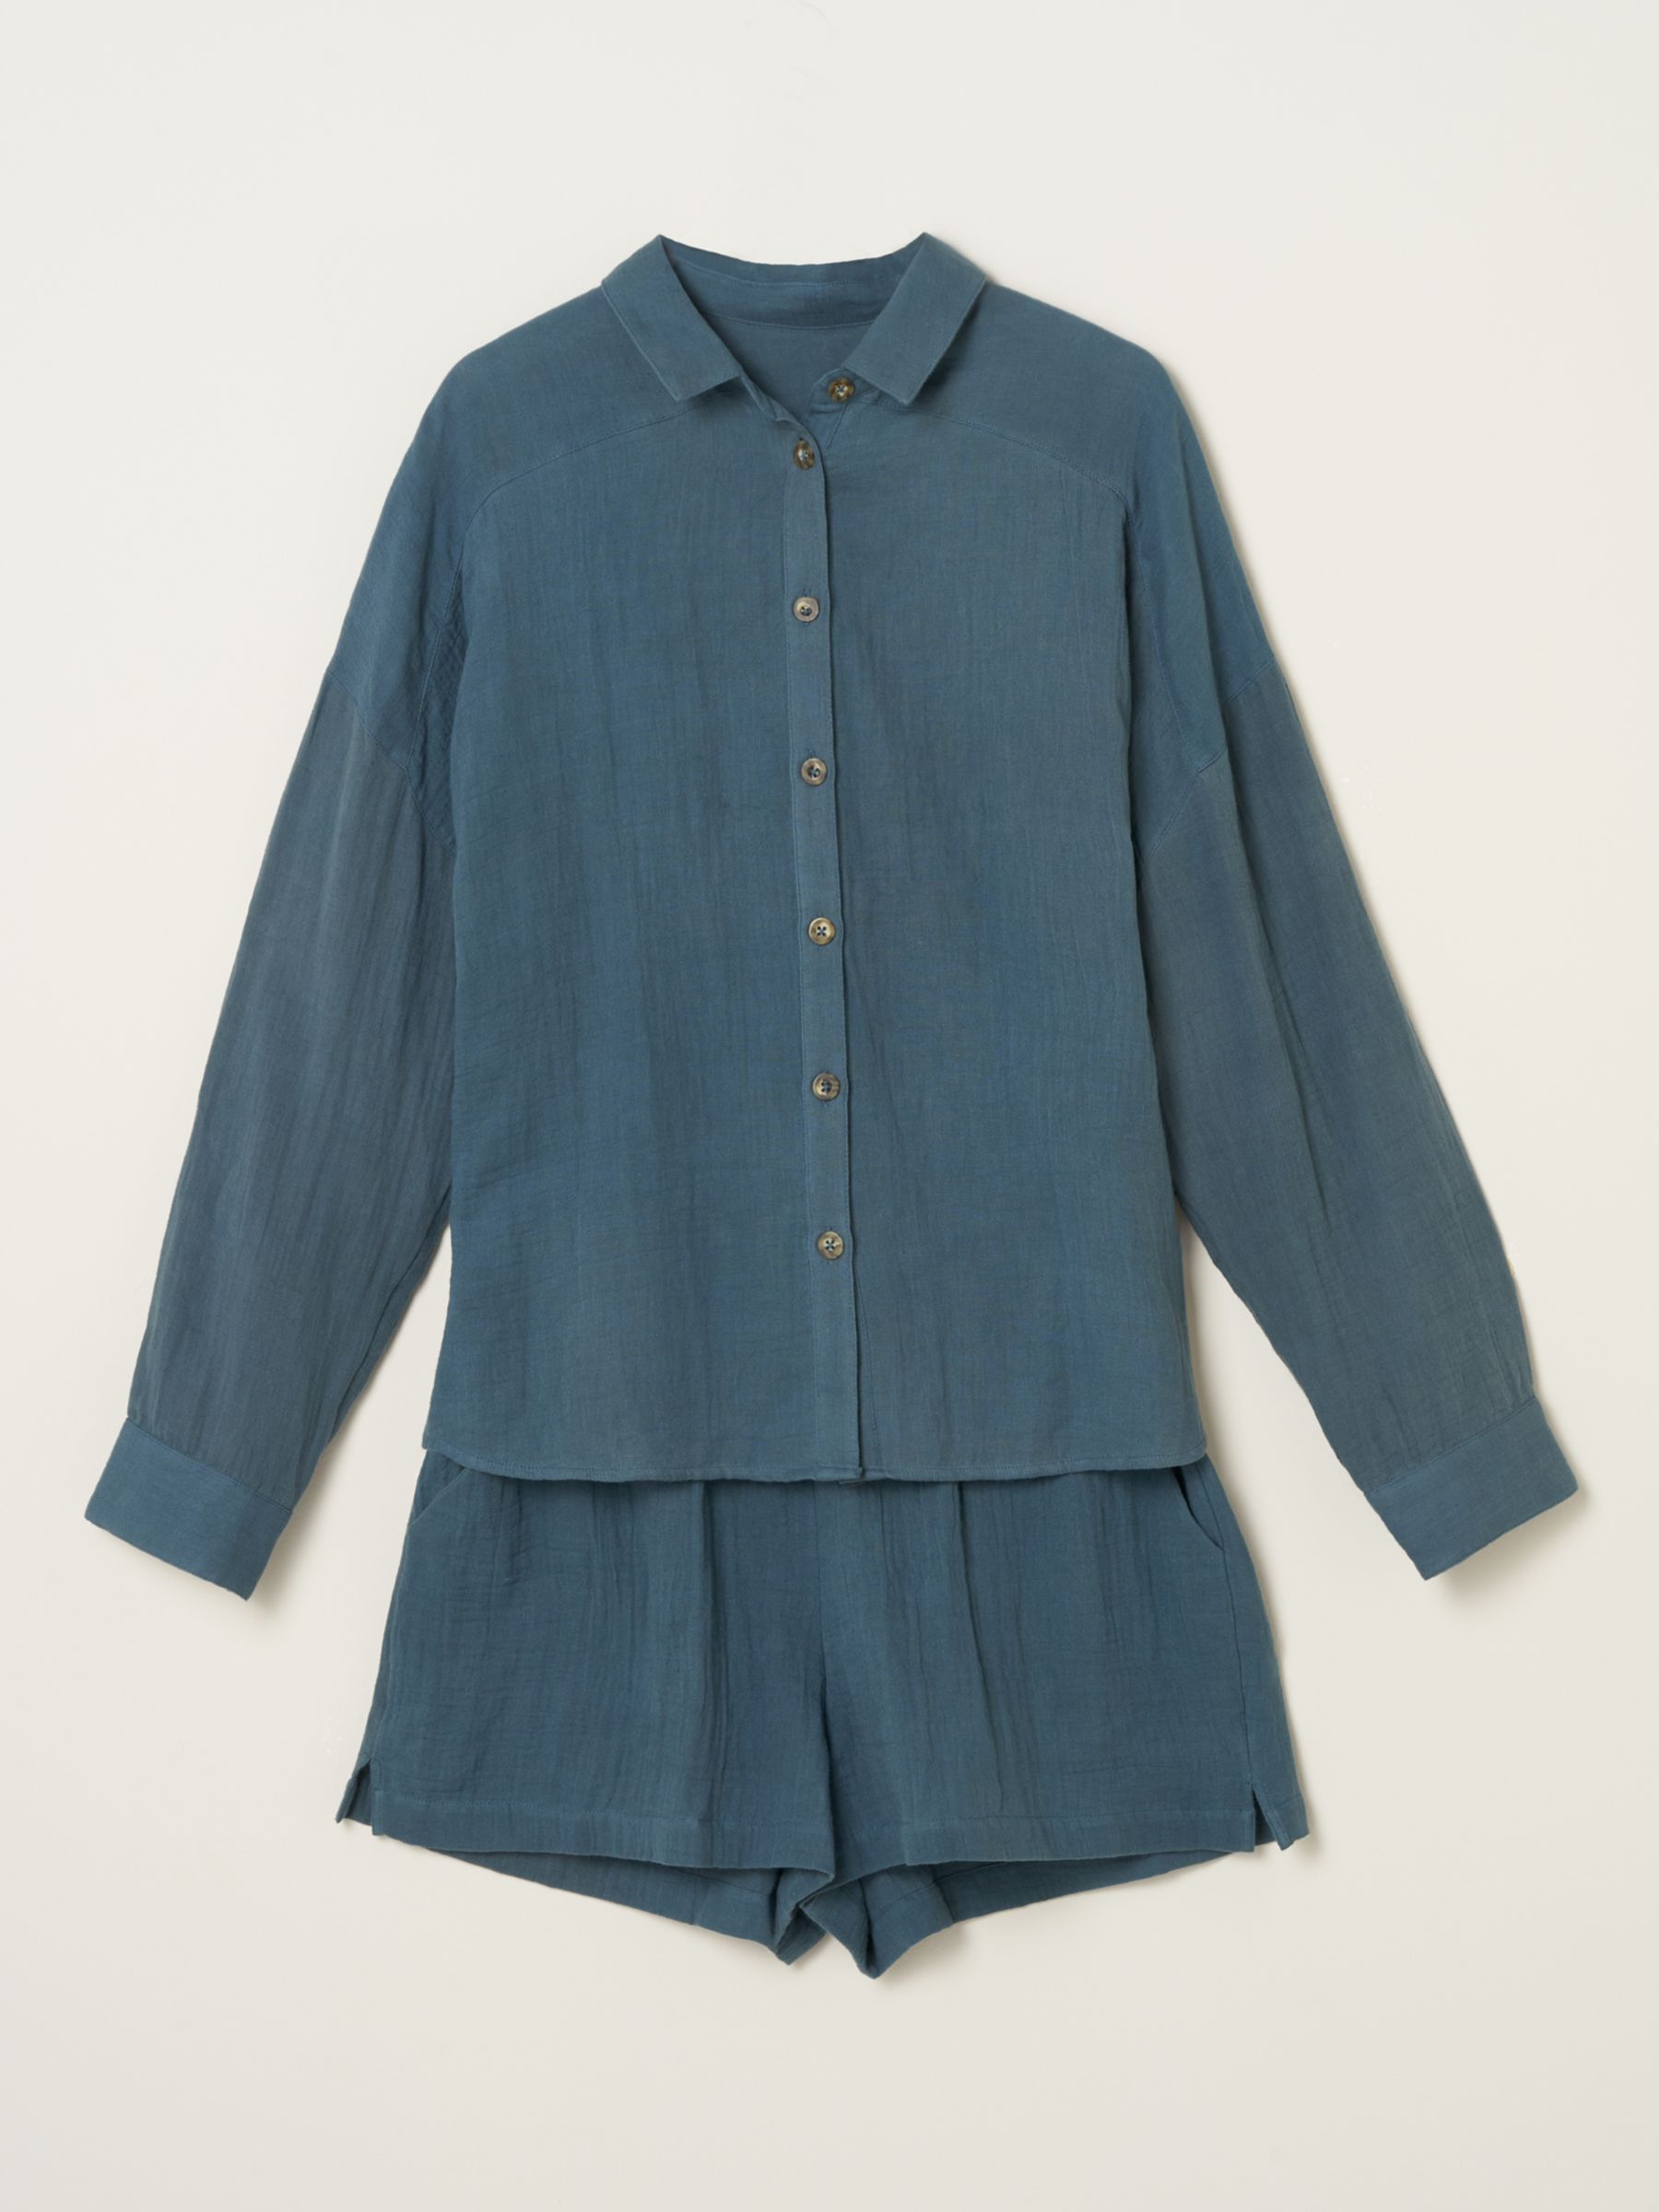 Buy Truly Cotton Cheesecloth Shirt and Shorts Set Online at johnlewis.com